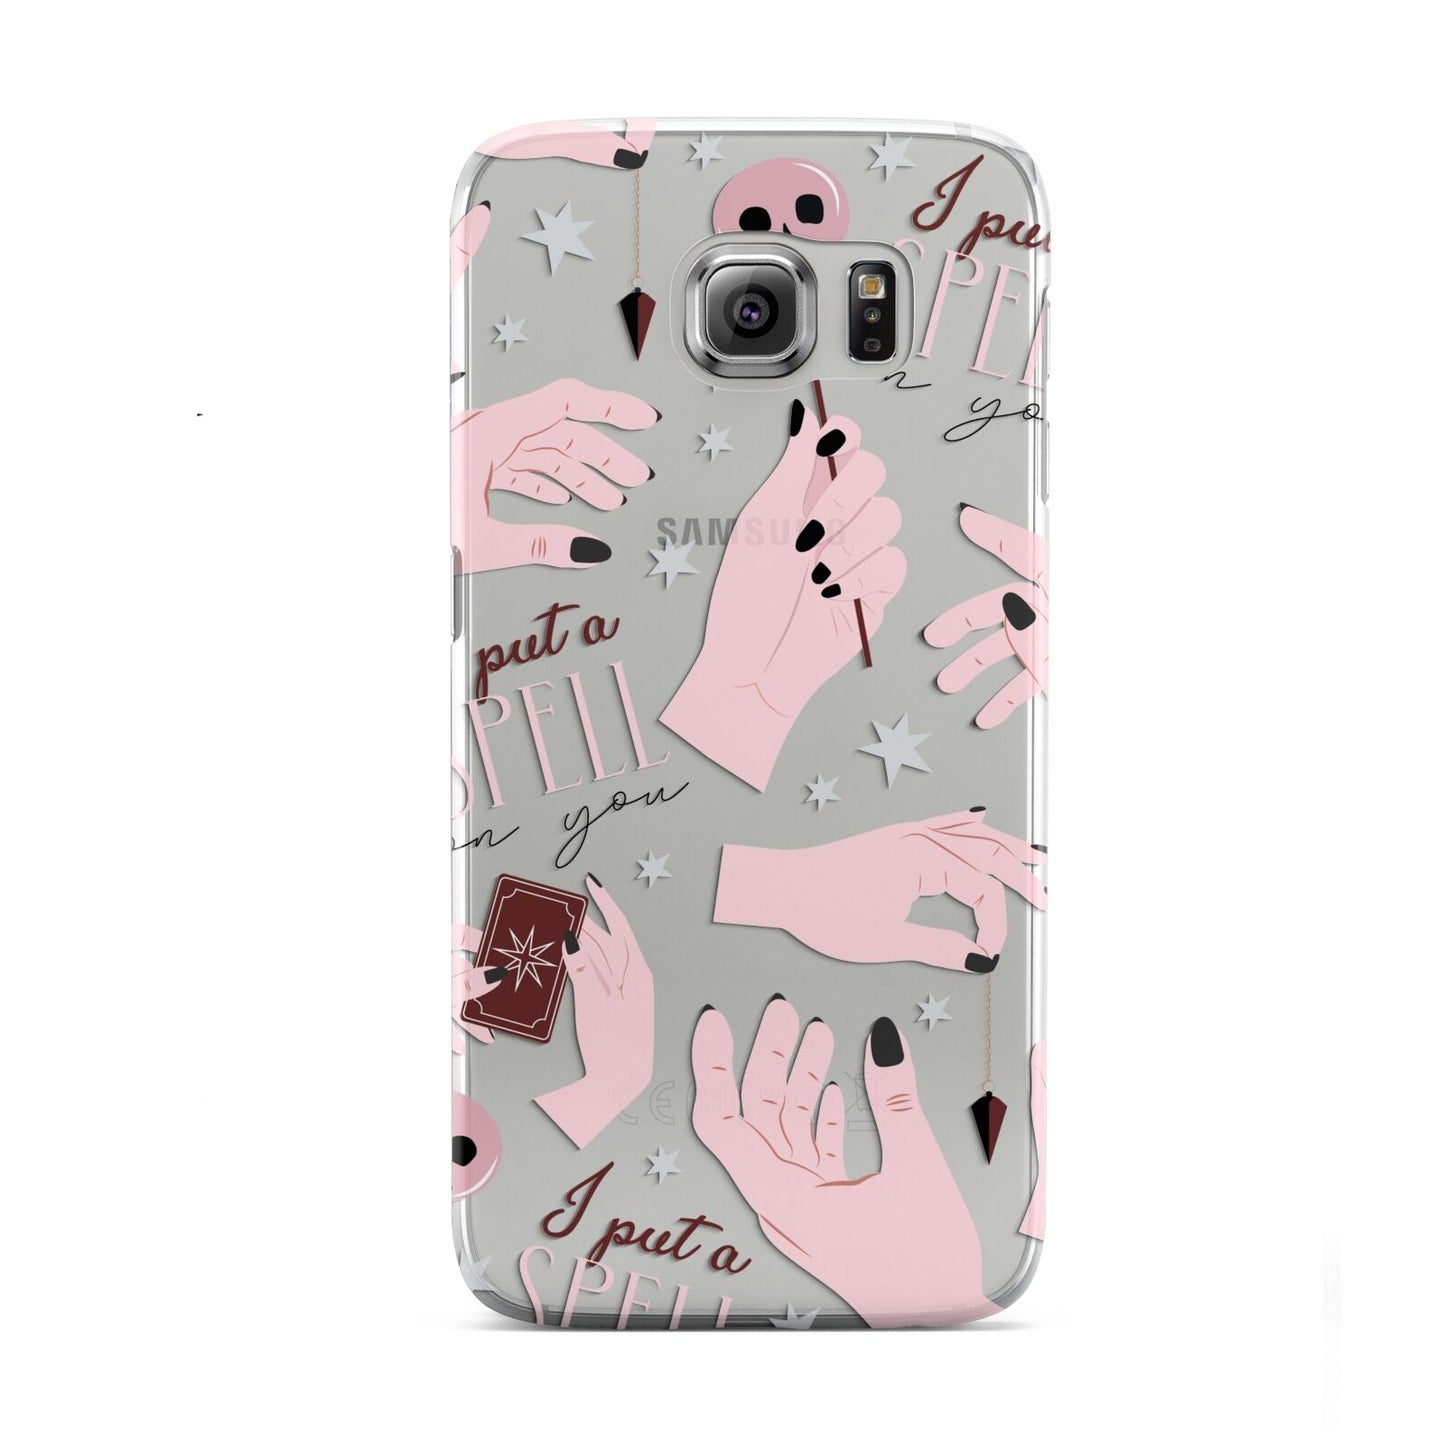 Witches Hands and Tarot Cards Samsung Galaxy S6 Case